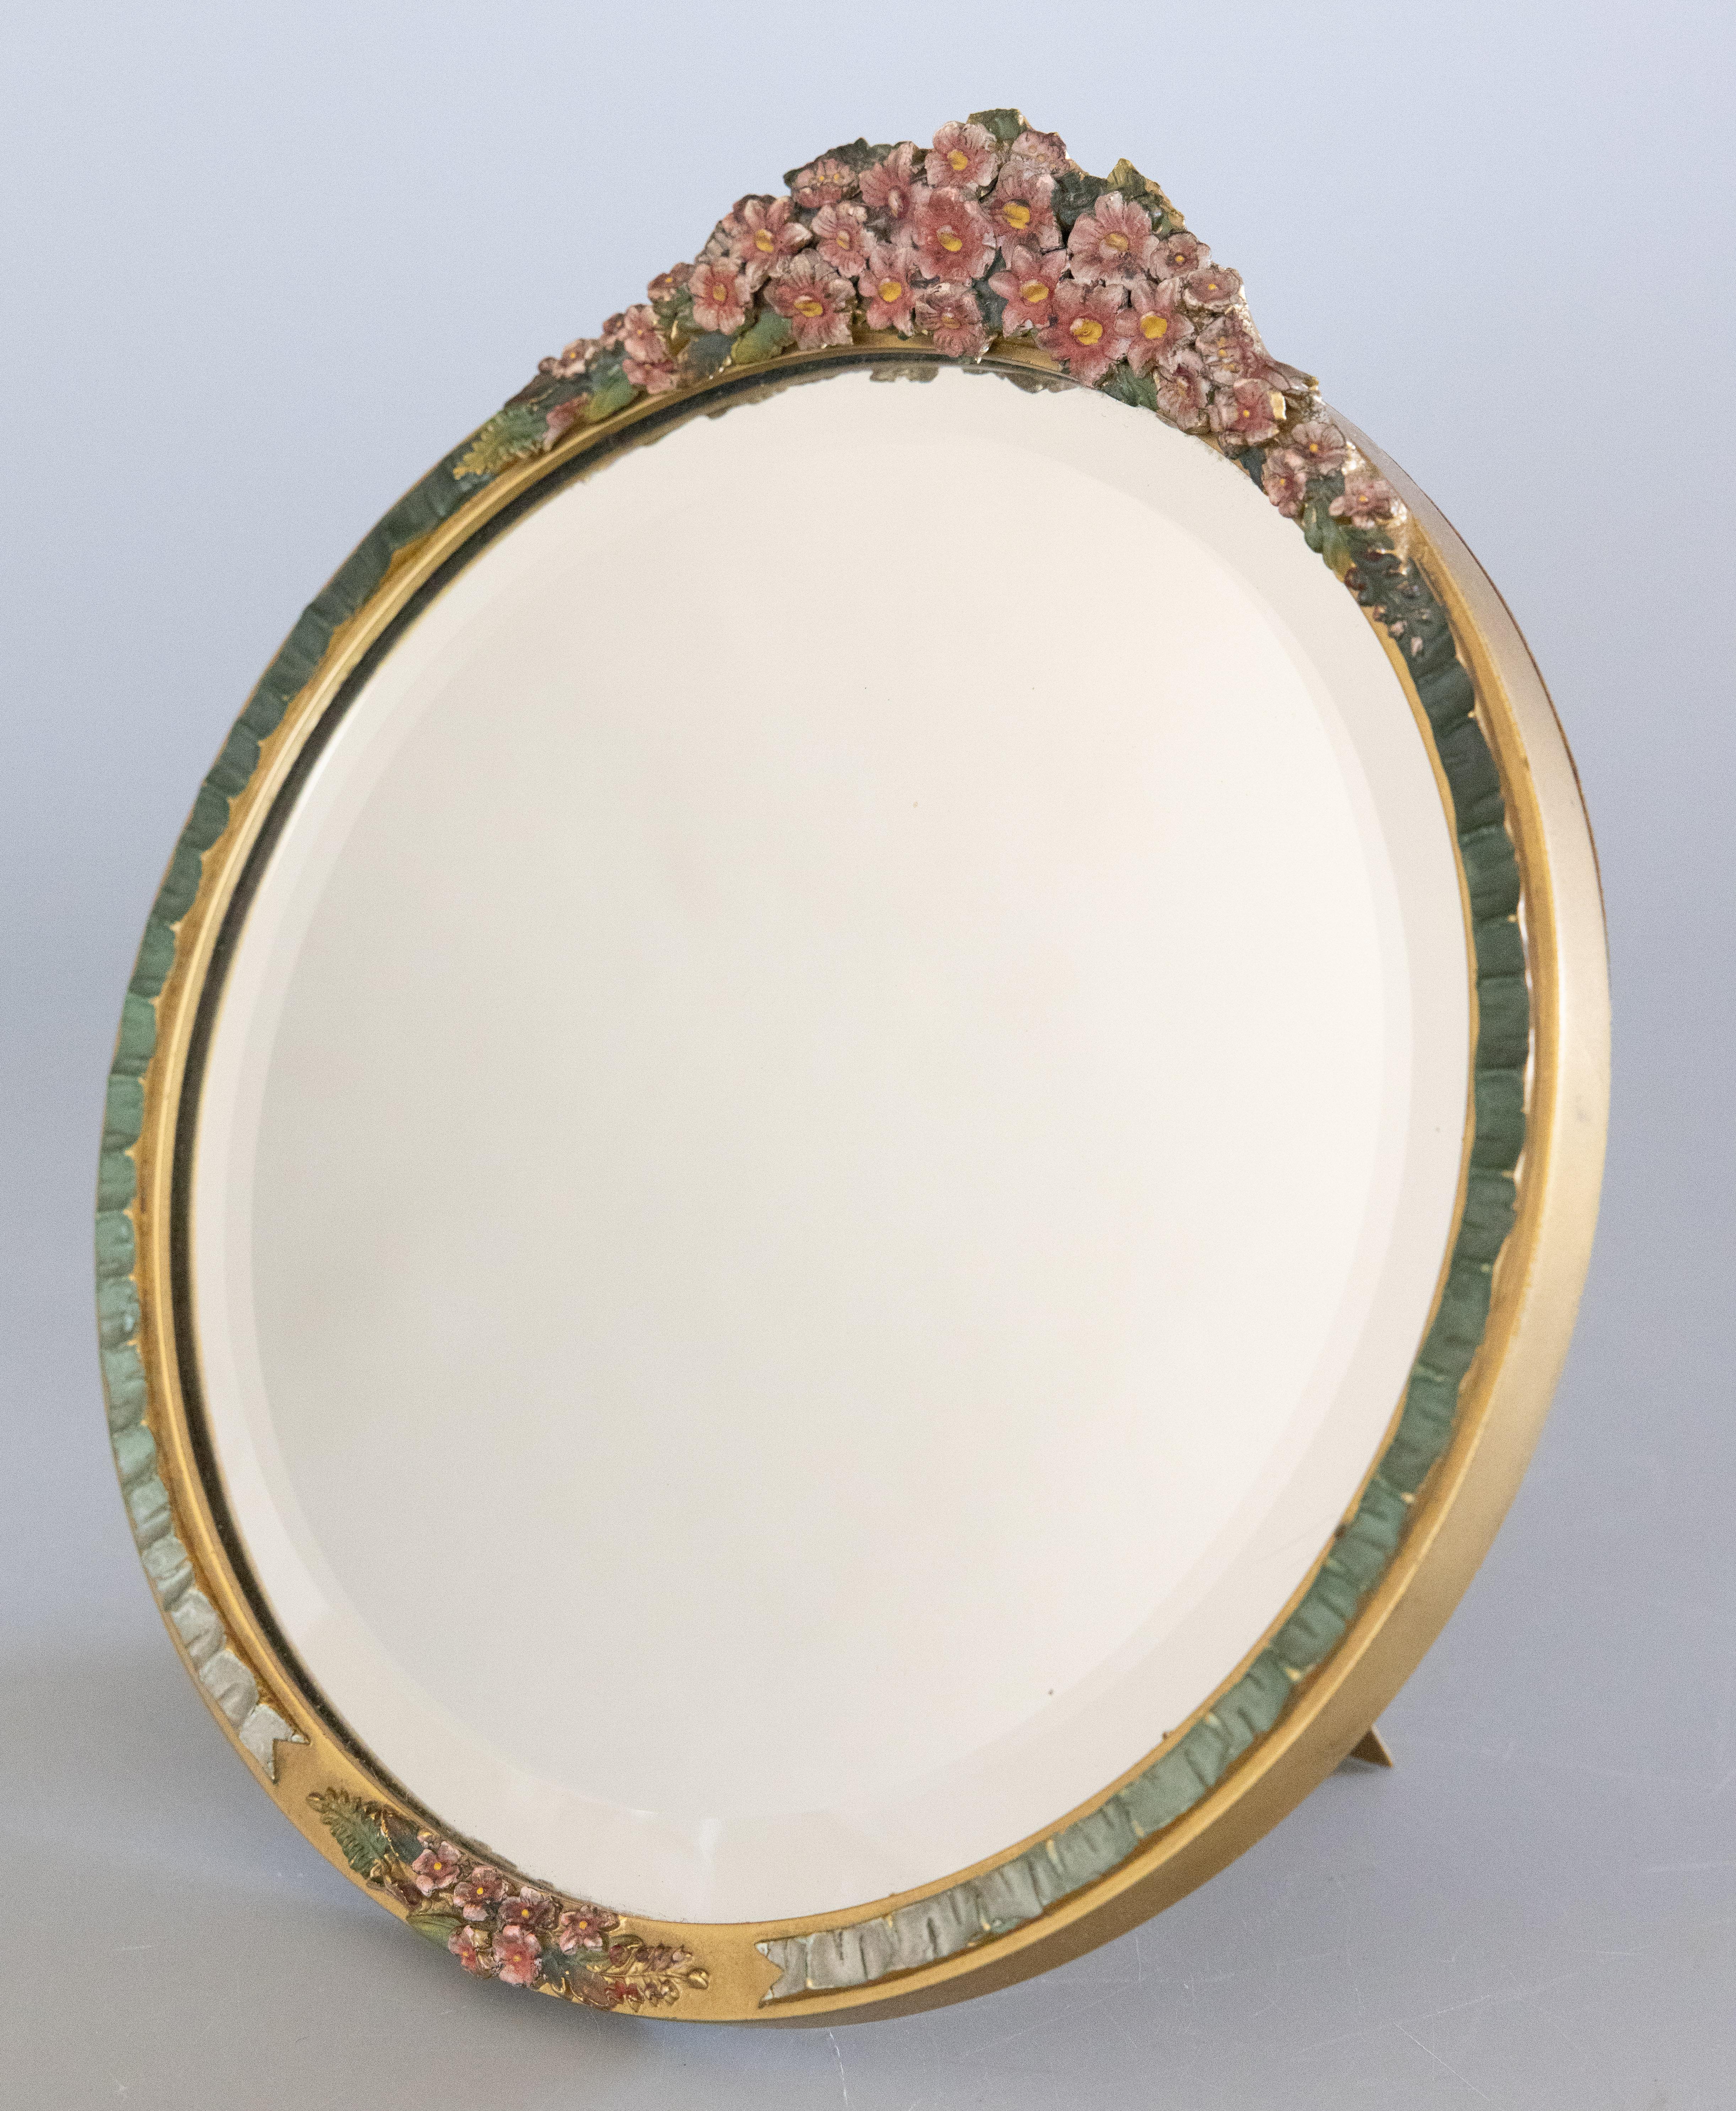 A fine antique English barbola round dressing table or vanity mirror with an easel back, circa 1920. This beautiful mirror features a beveled mirror glass surrounded by a ruched design border hand painted with gorgeous colors, gilt accents, and